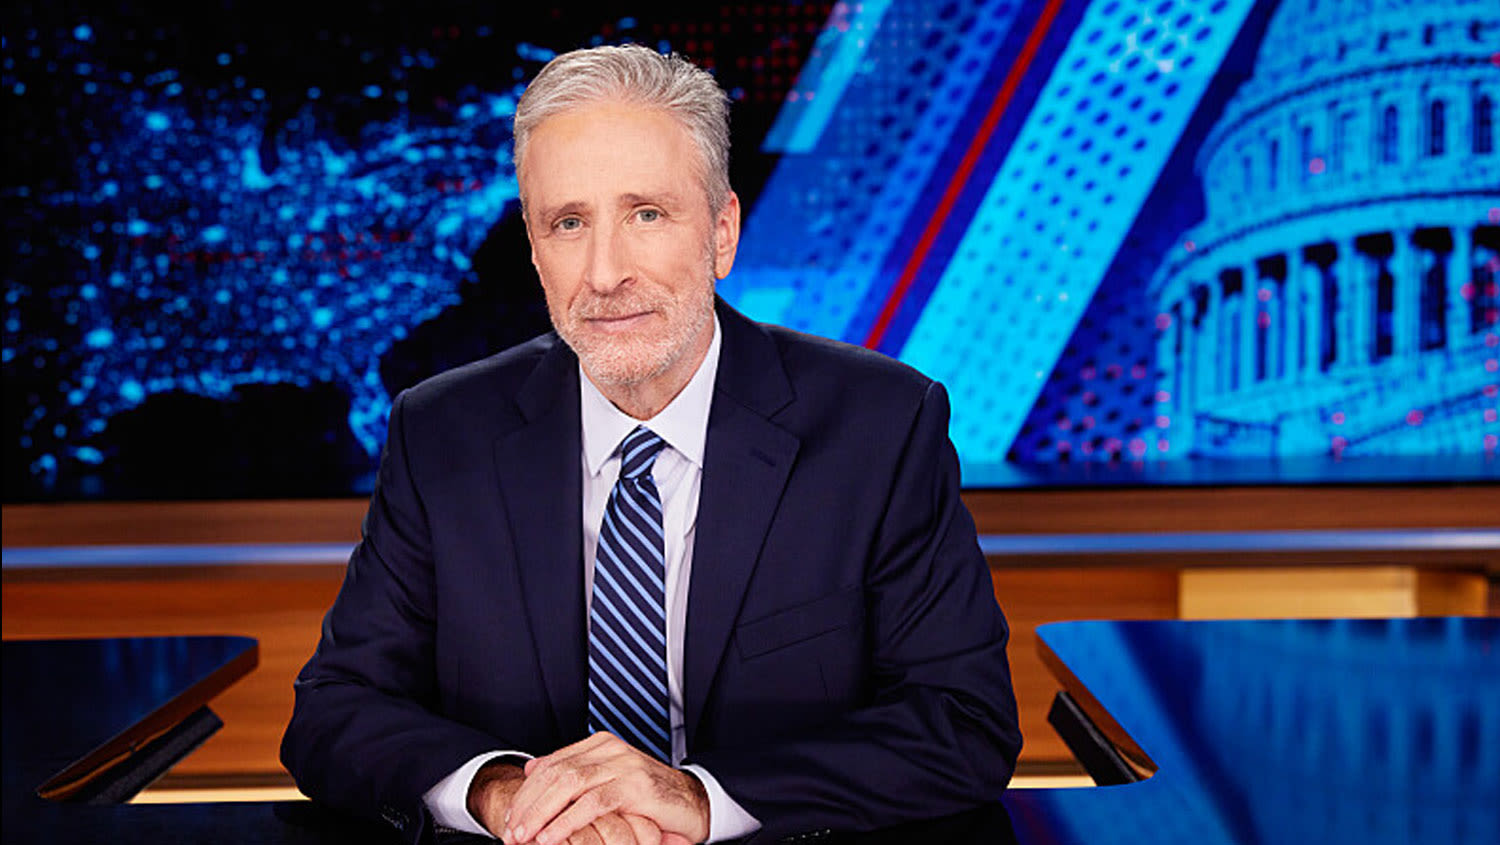 ‘The Weekly Show With Jon Stewart’ Podcast Sets Premiere Date